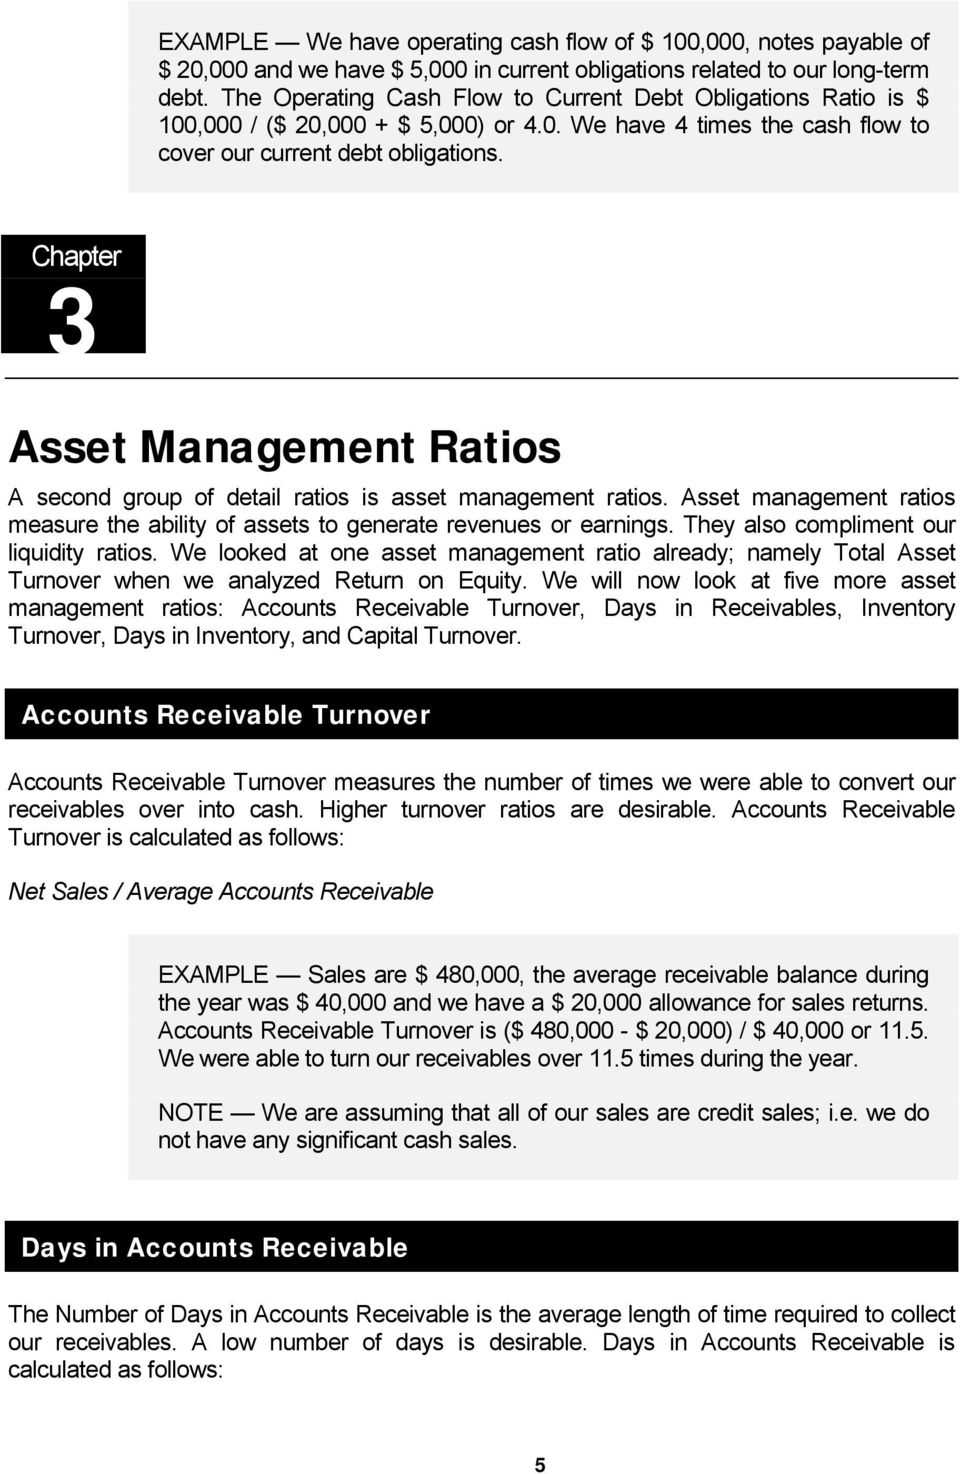 Chapter 3 Asset Management Ratios A second group of detail ratios is asset management ratios. Asset management ratios measure the ability of assets to generate revenues or earnings.